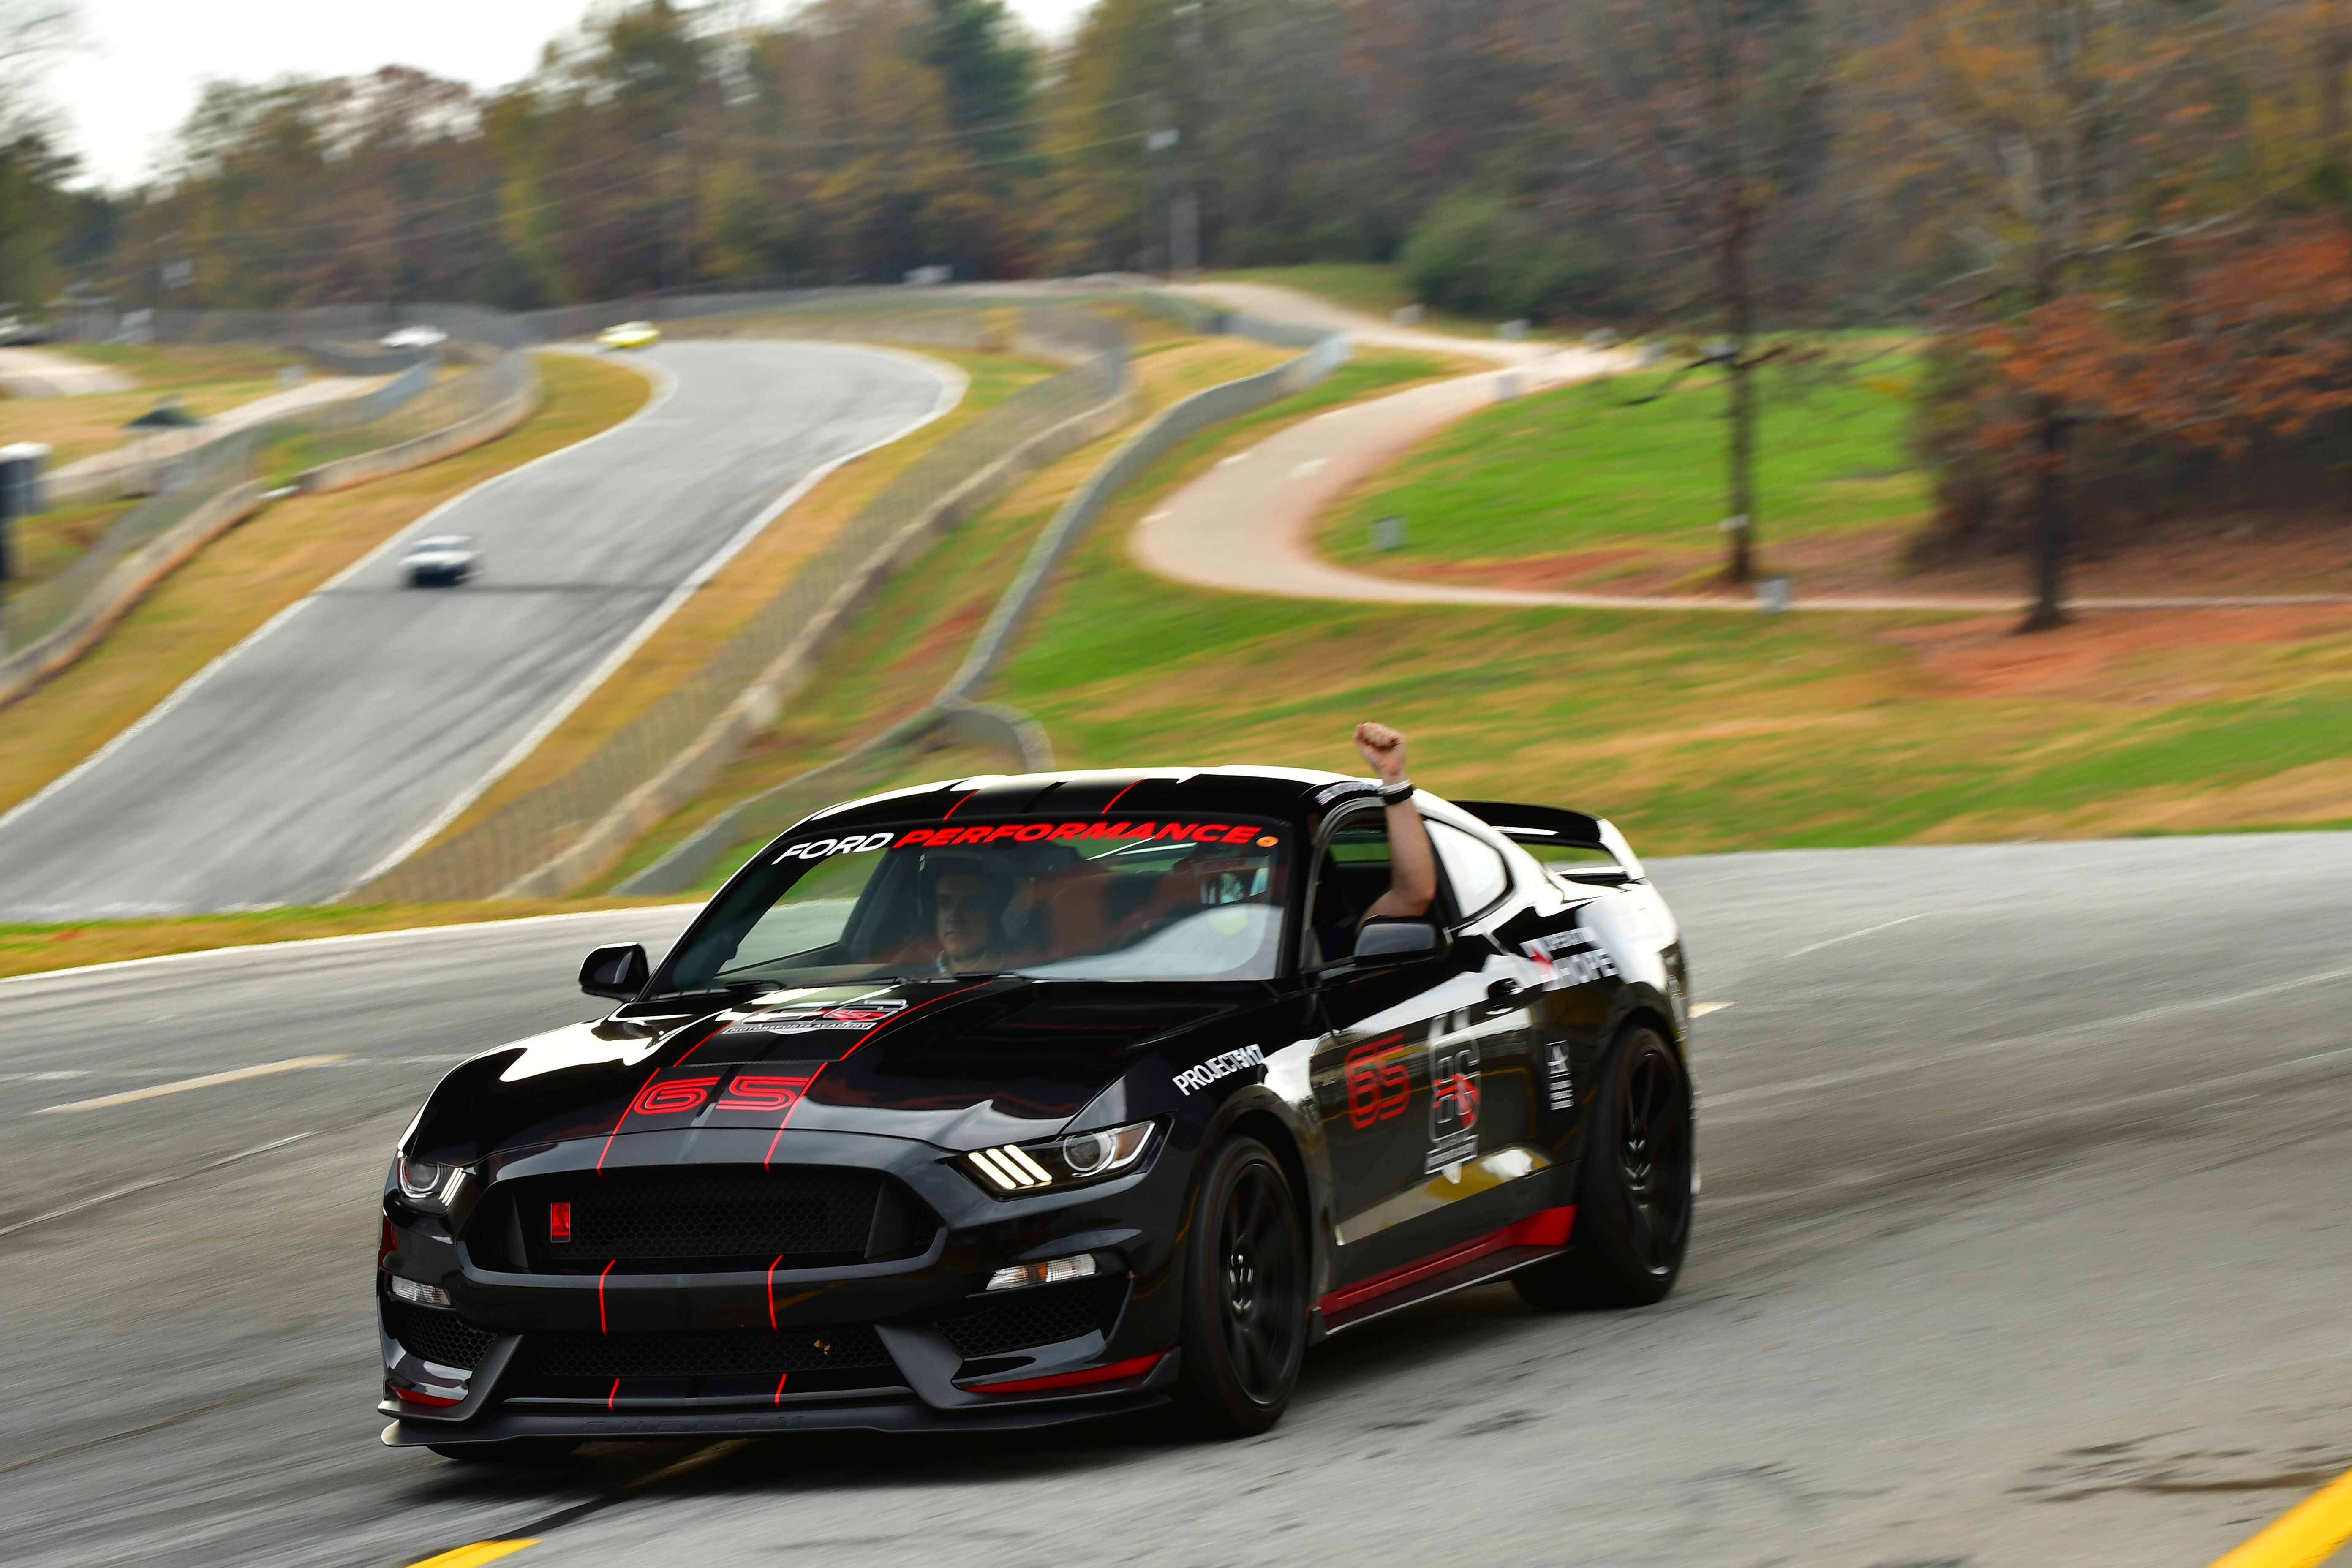 Ford Motor Company and Ford Performance provide support to BG